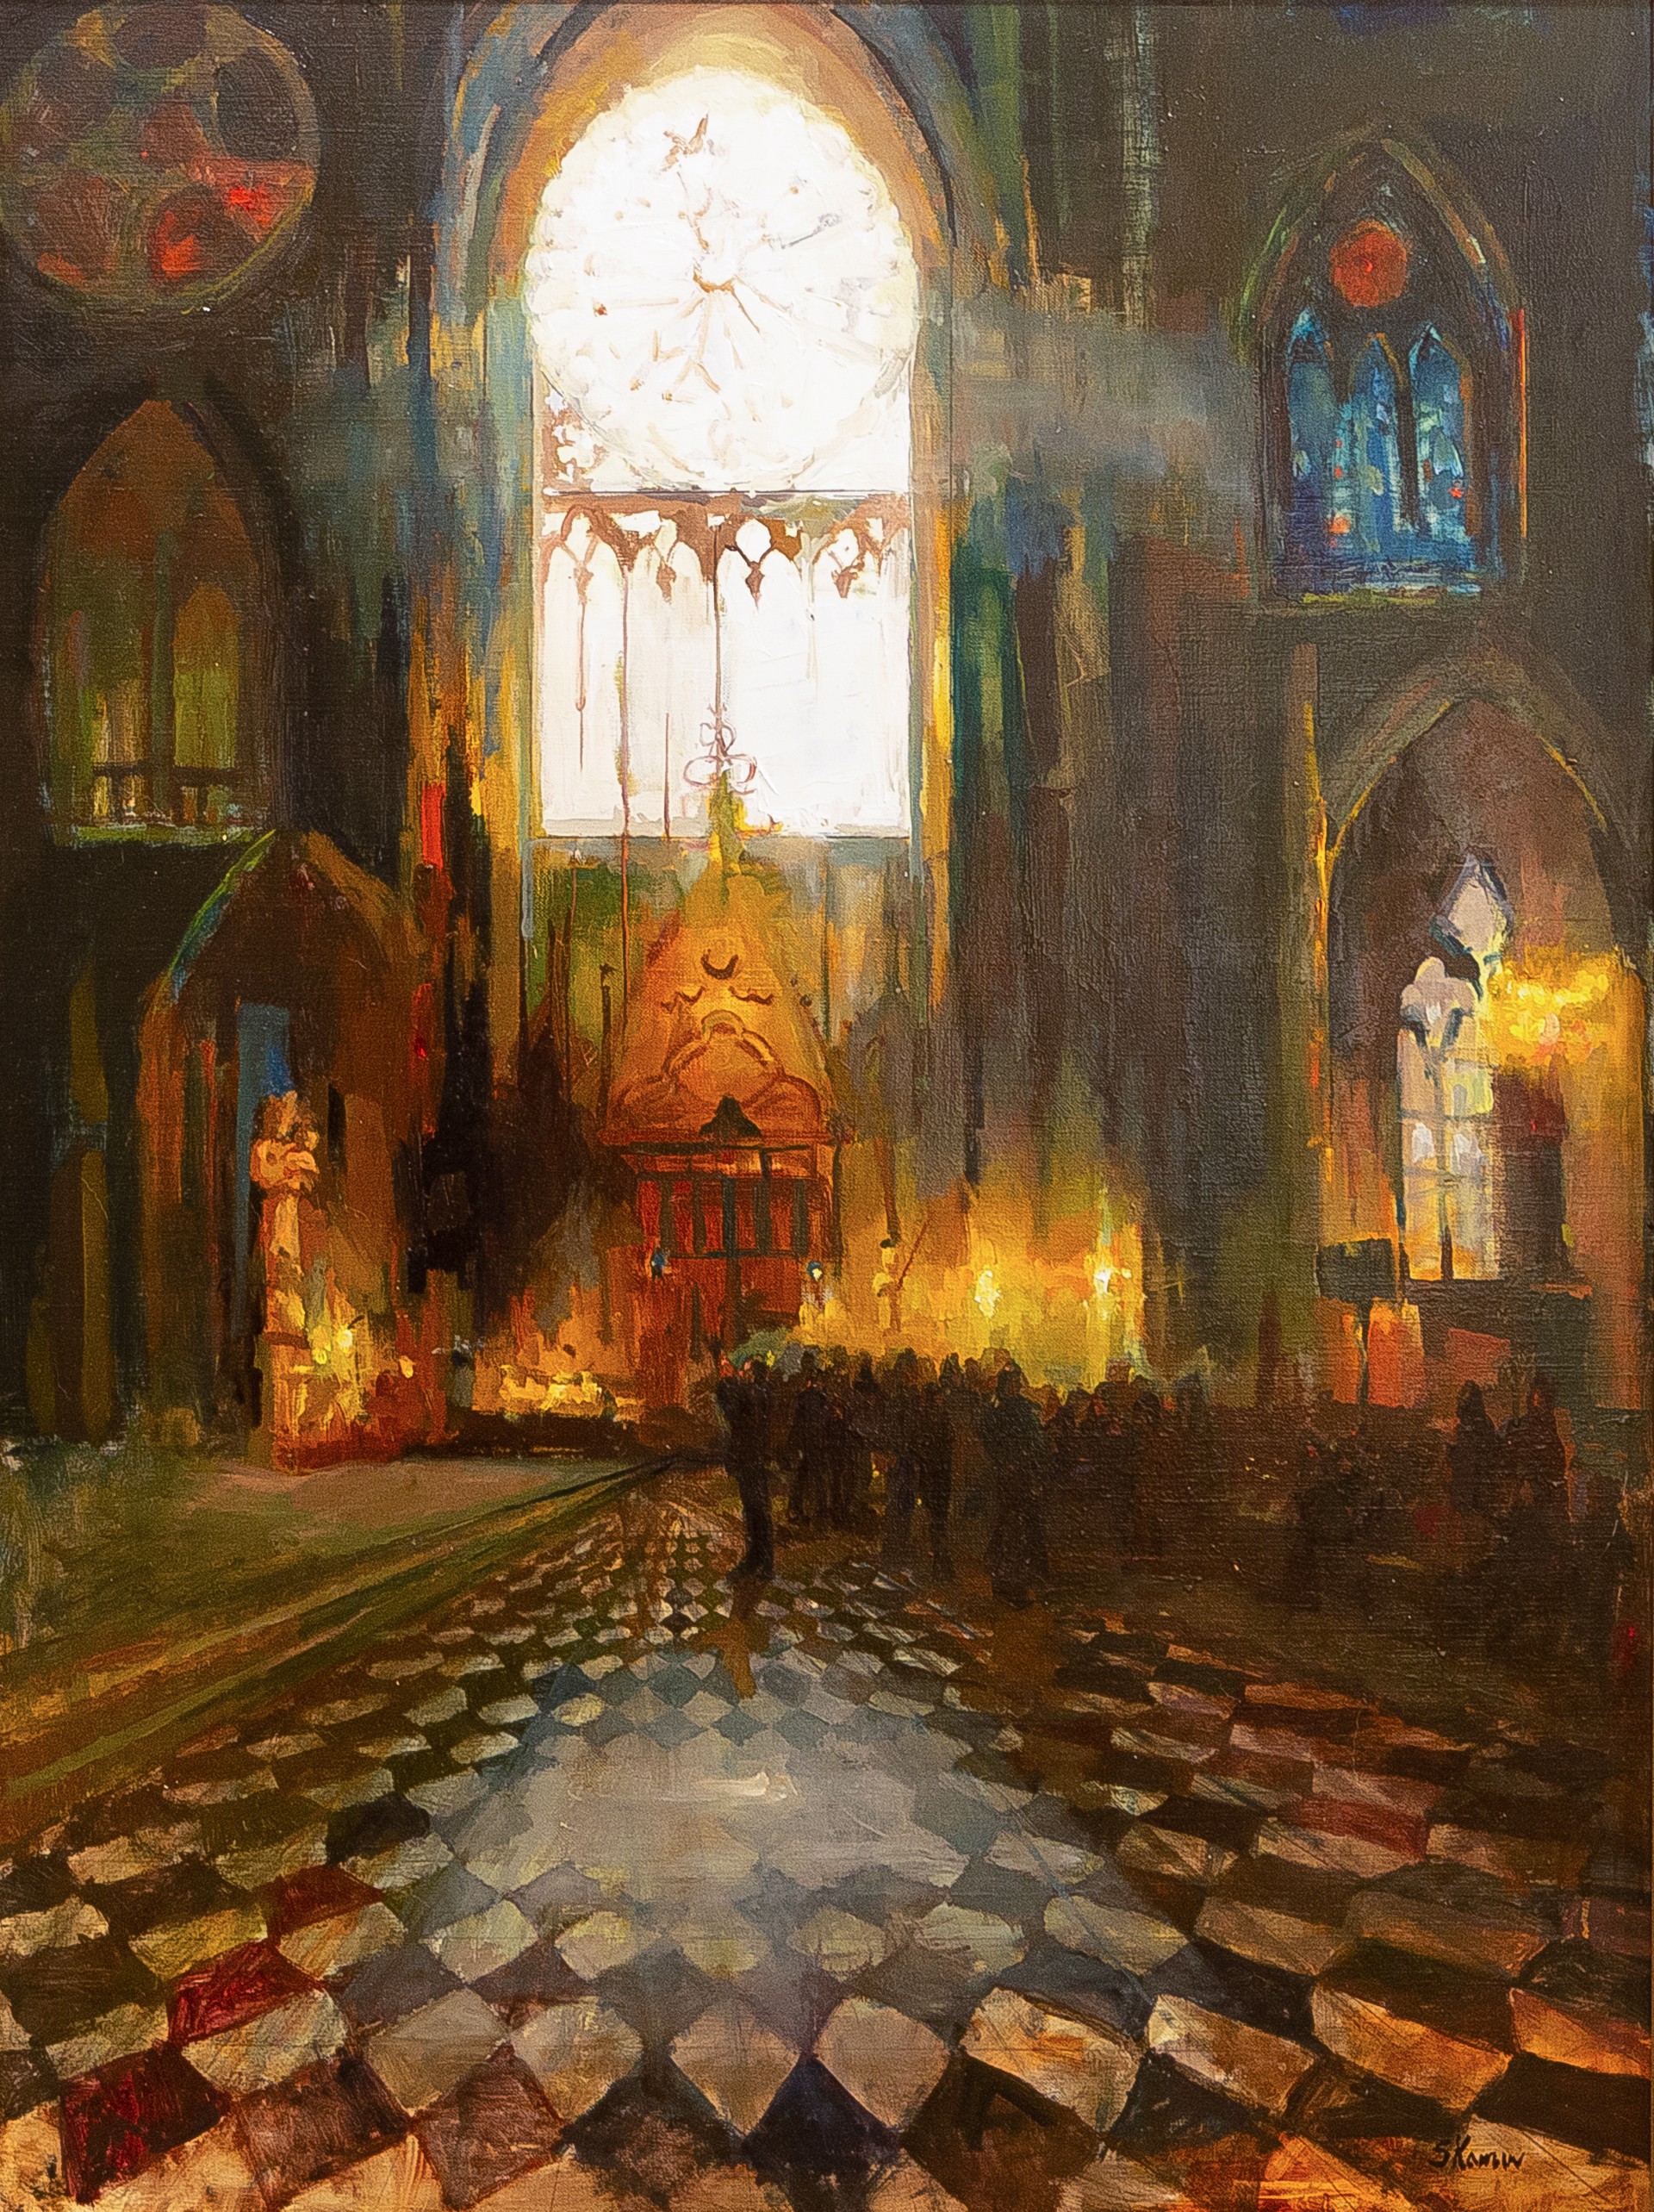 Notre Dame by Stacy Kamin